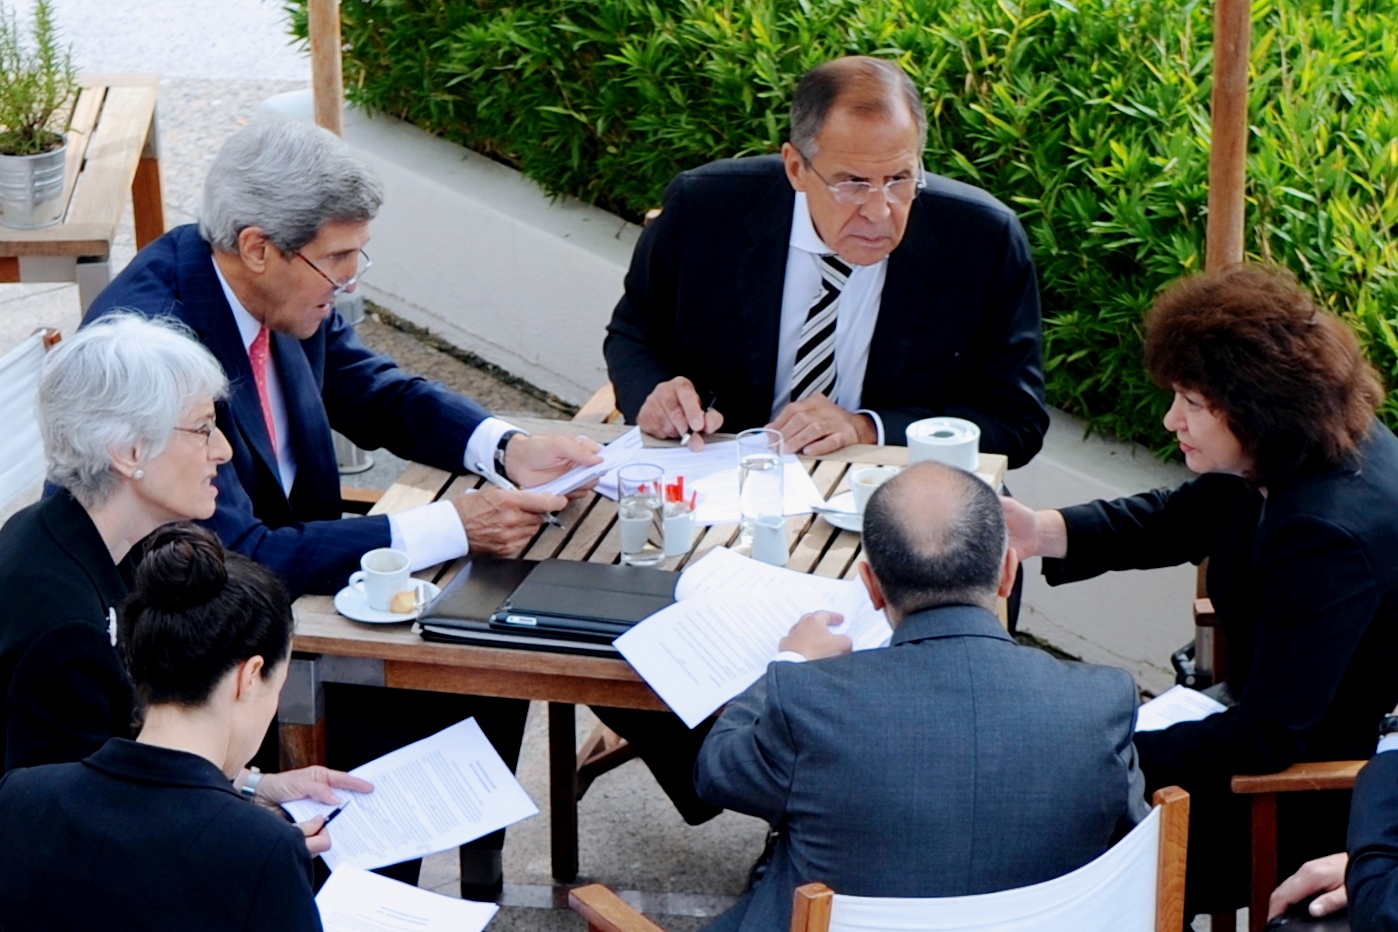 Kerry_and_Lavrov,_with_senior_advisers,_negotiate_chemical_weapons_agreement_on_September_14,_2013